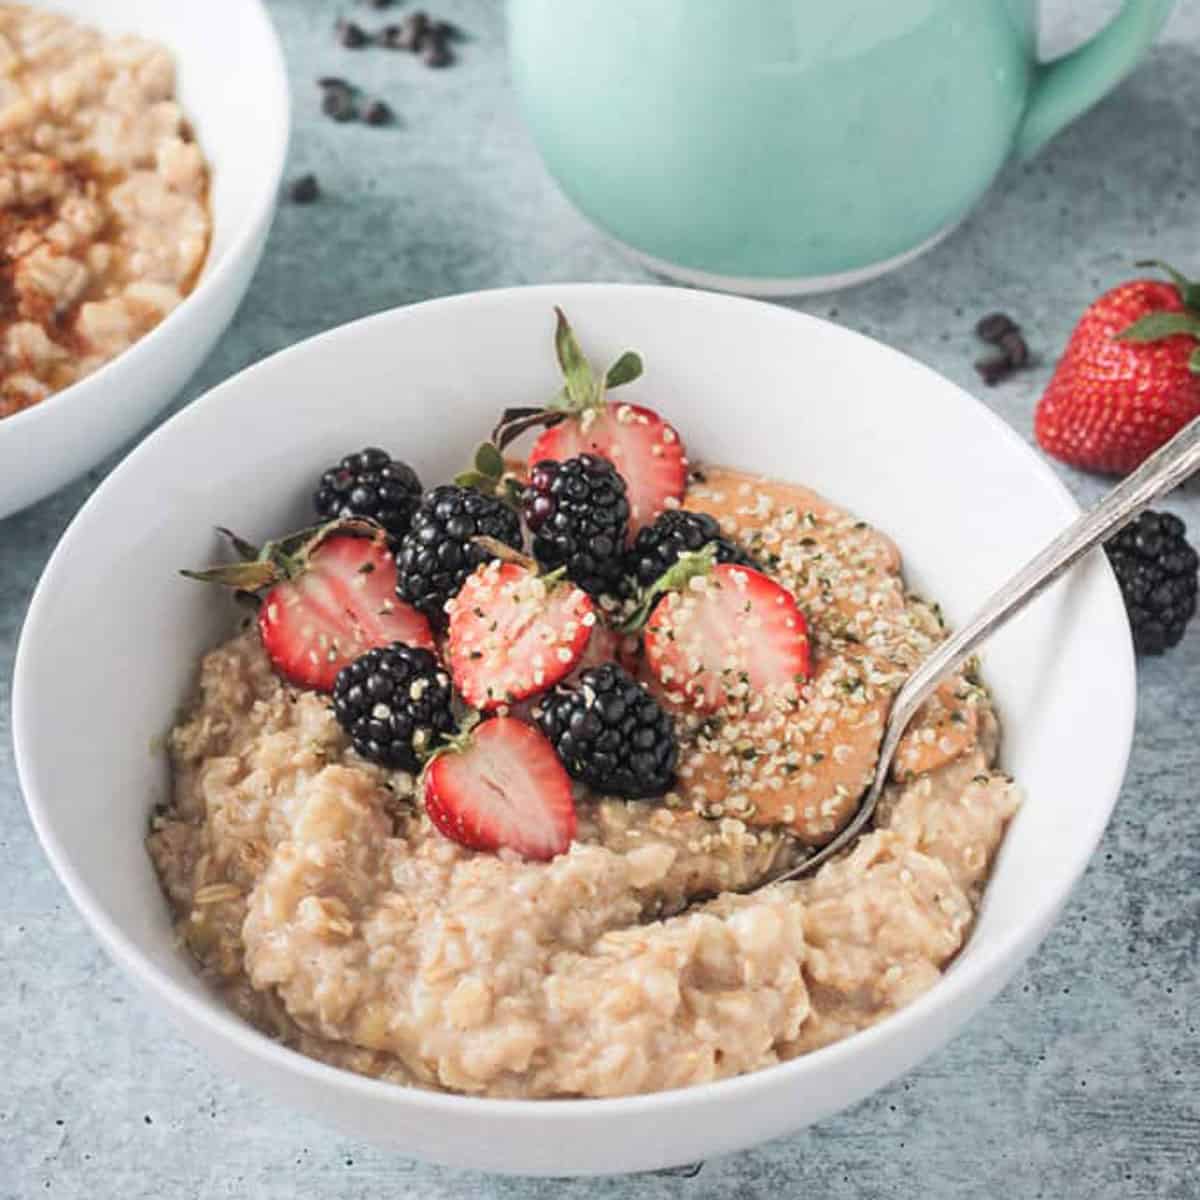 Sweet oatmeal with absolutely no added sugar